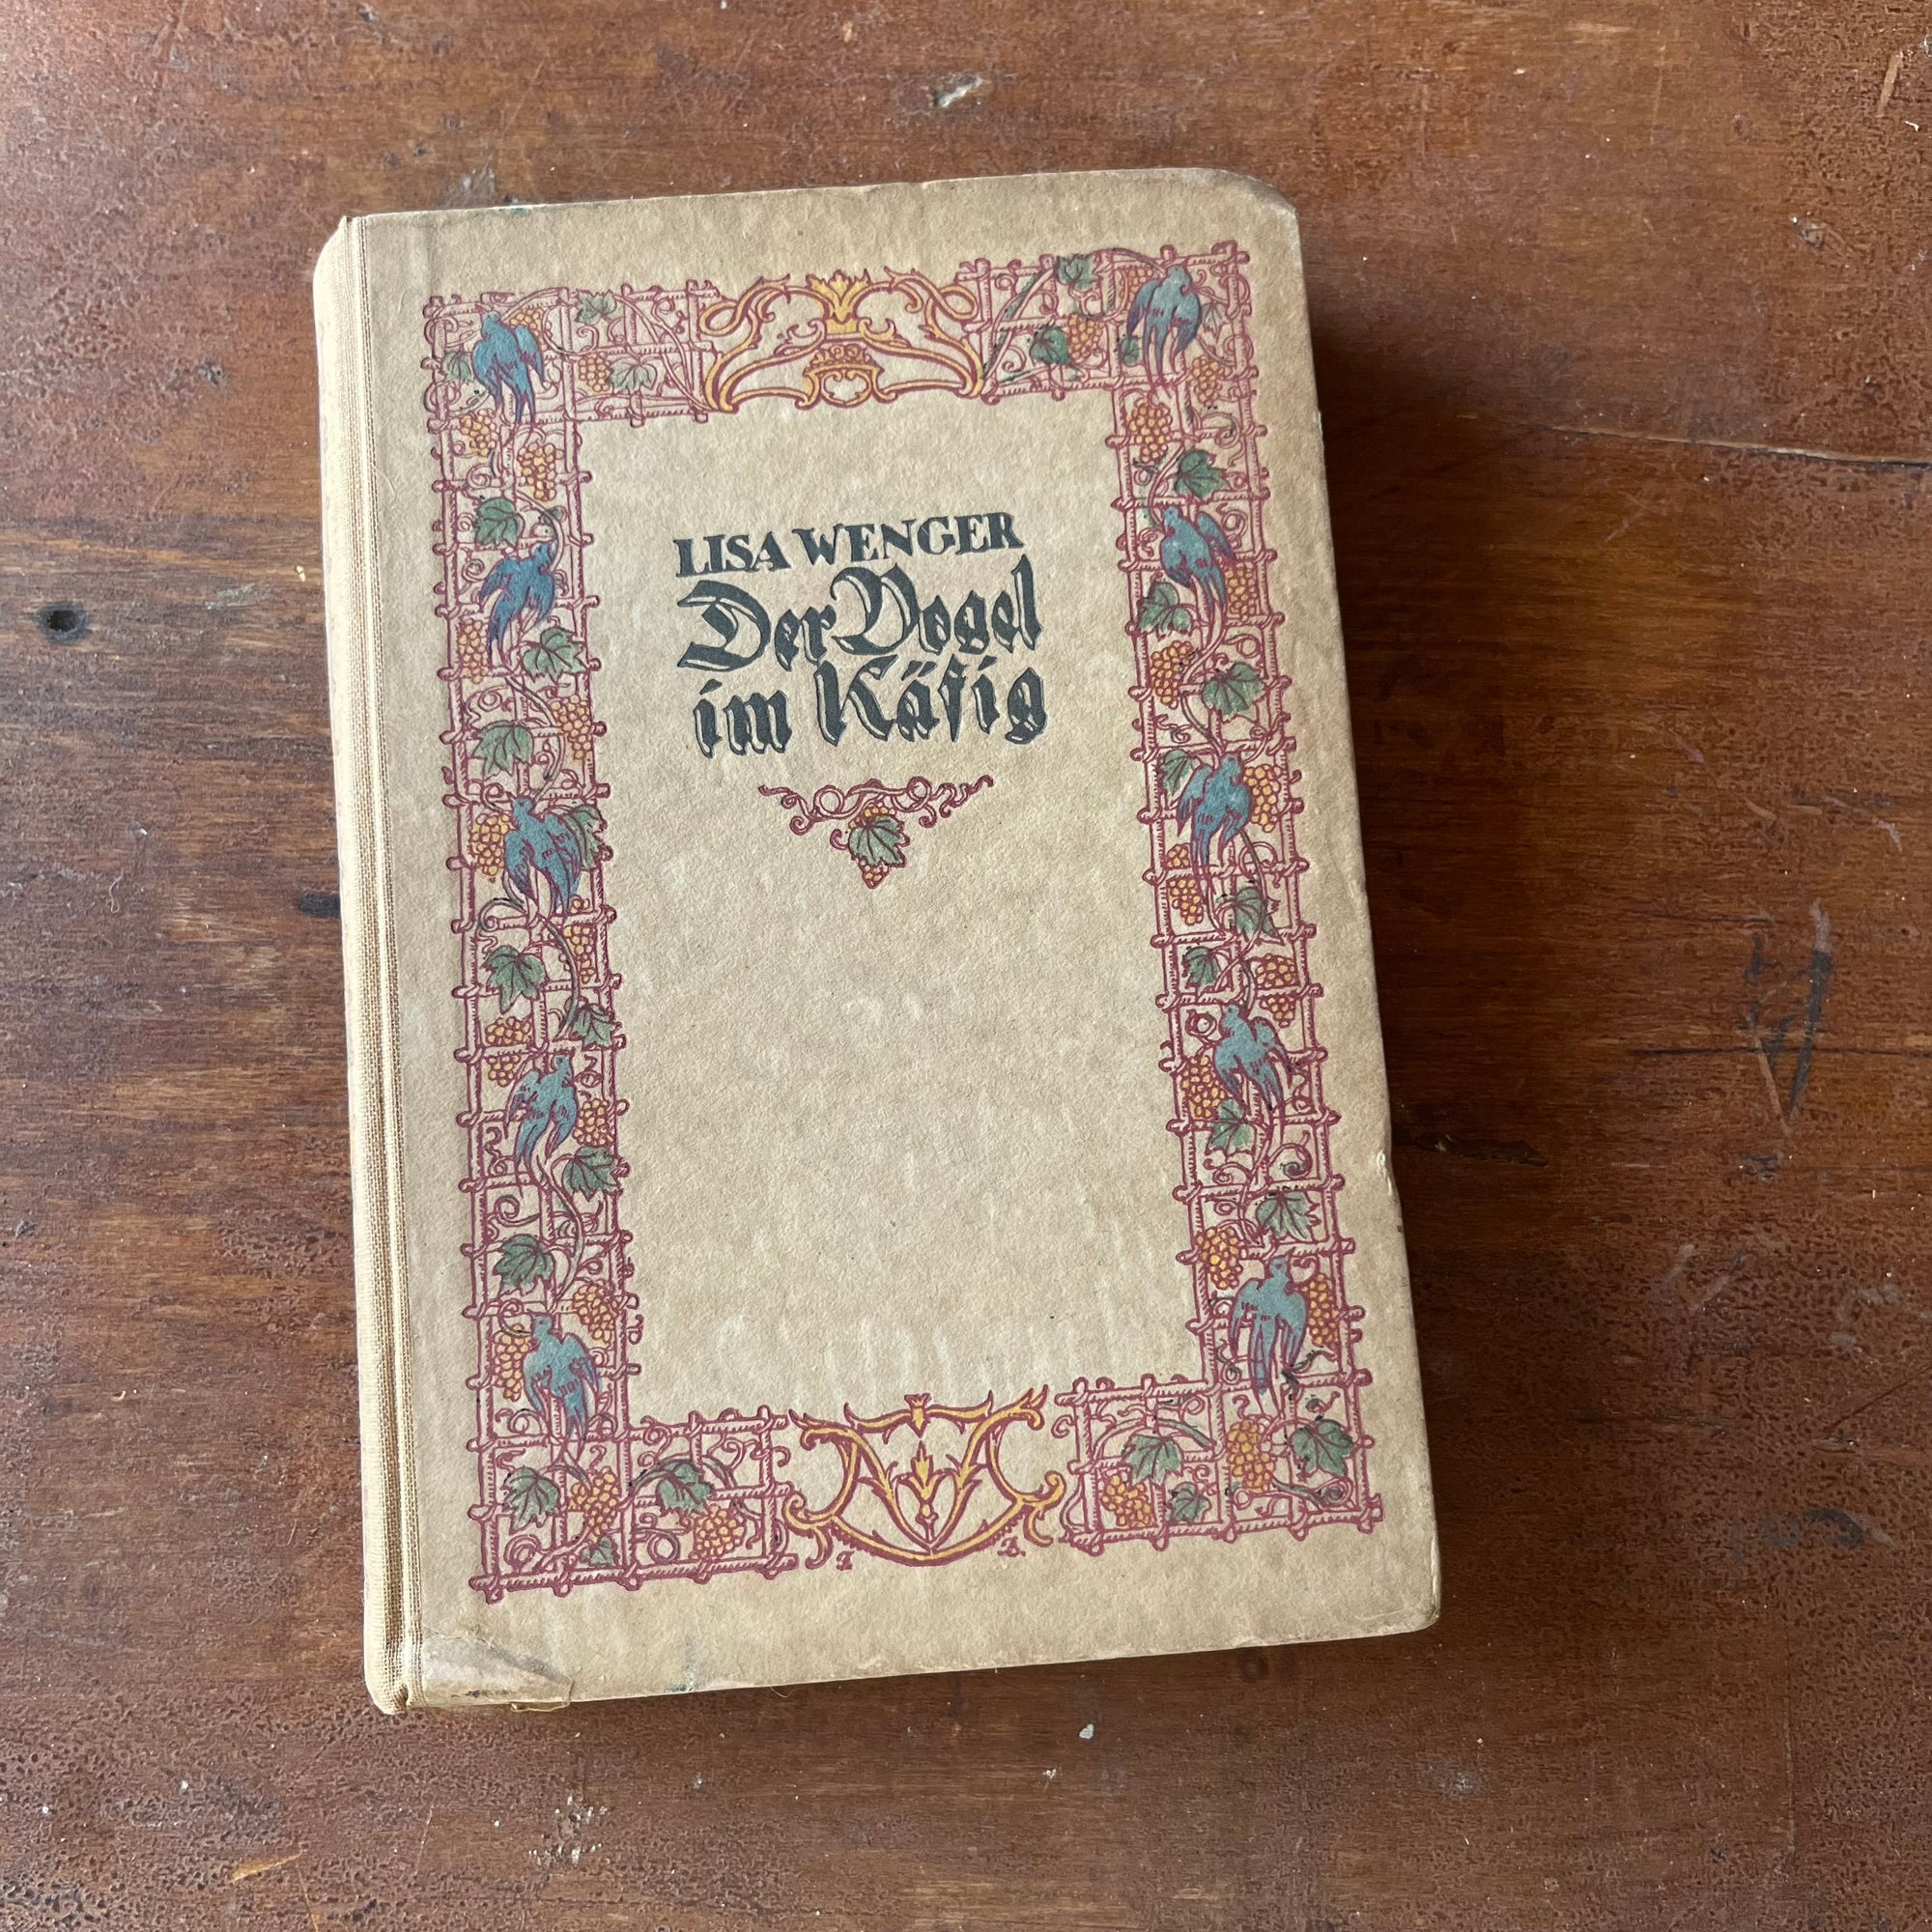 Der Vogel im Kafig (The Bird in the Cage) by Lisa Wenger-antique novel-view of the front cover with a floral design with birds in a block around the edge - the title is in the middle